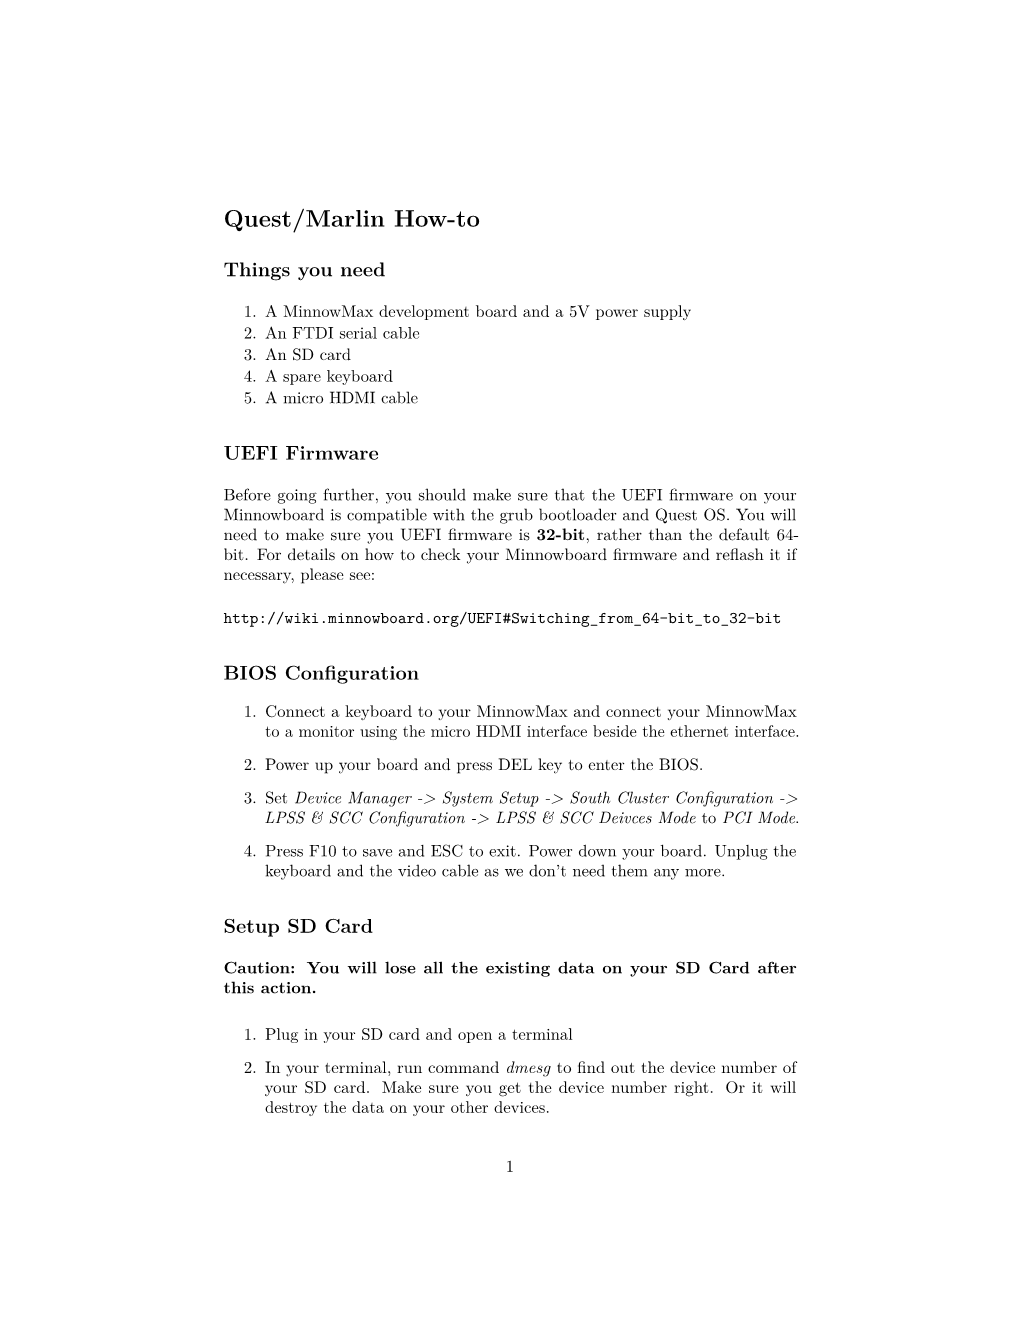 Quest/Marlin How-To